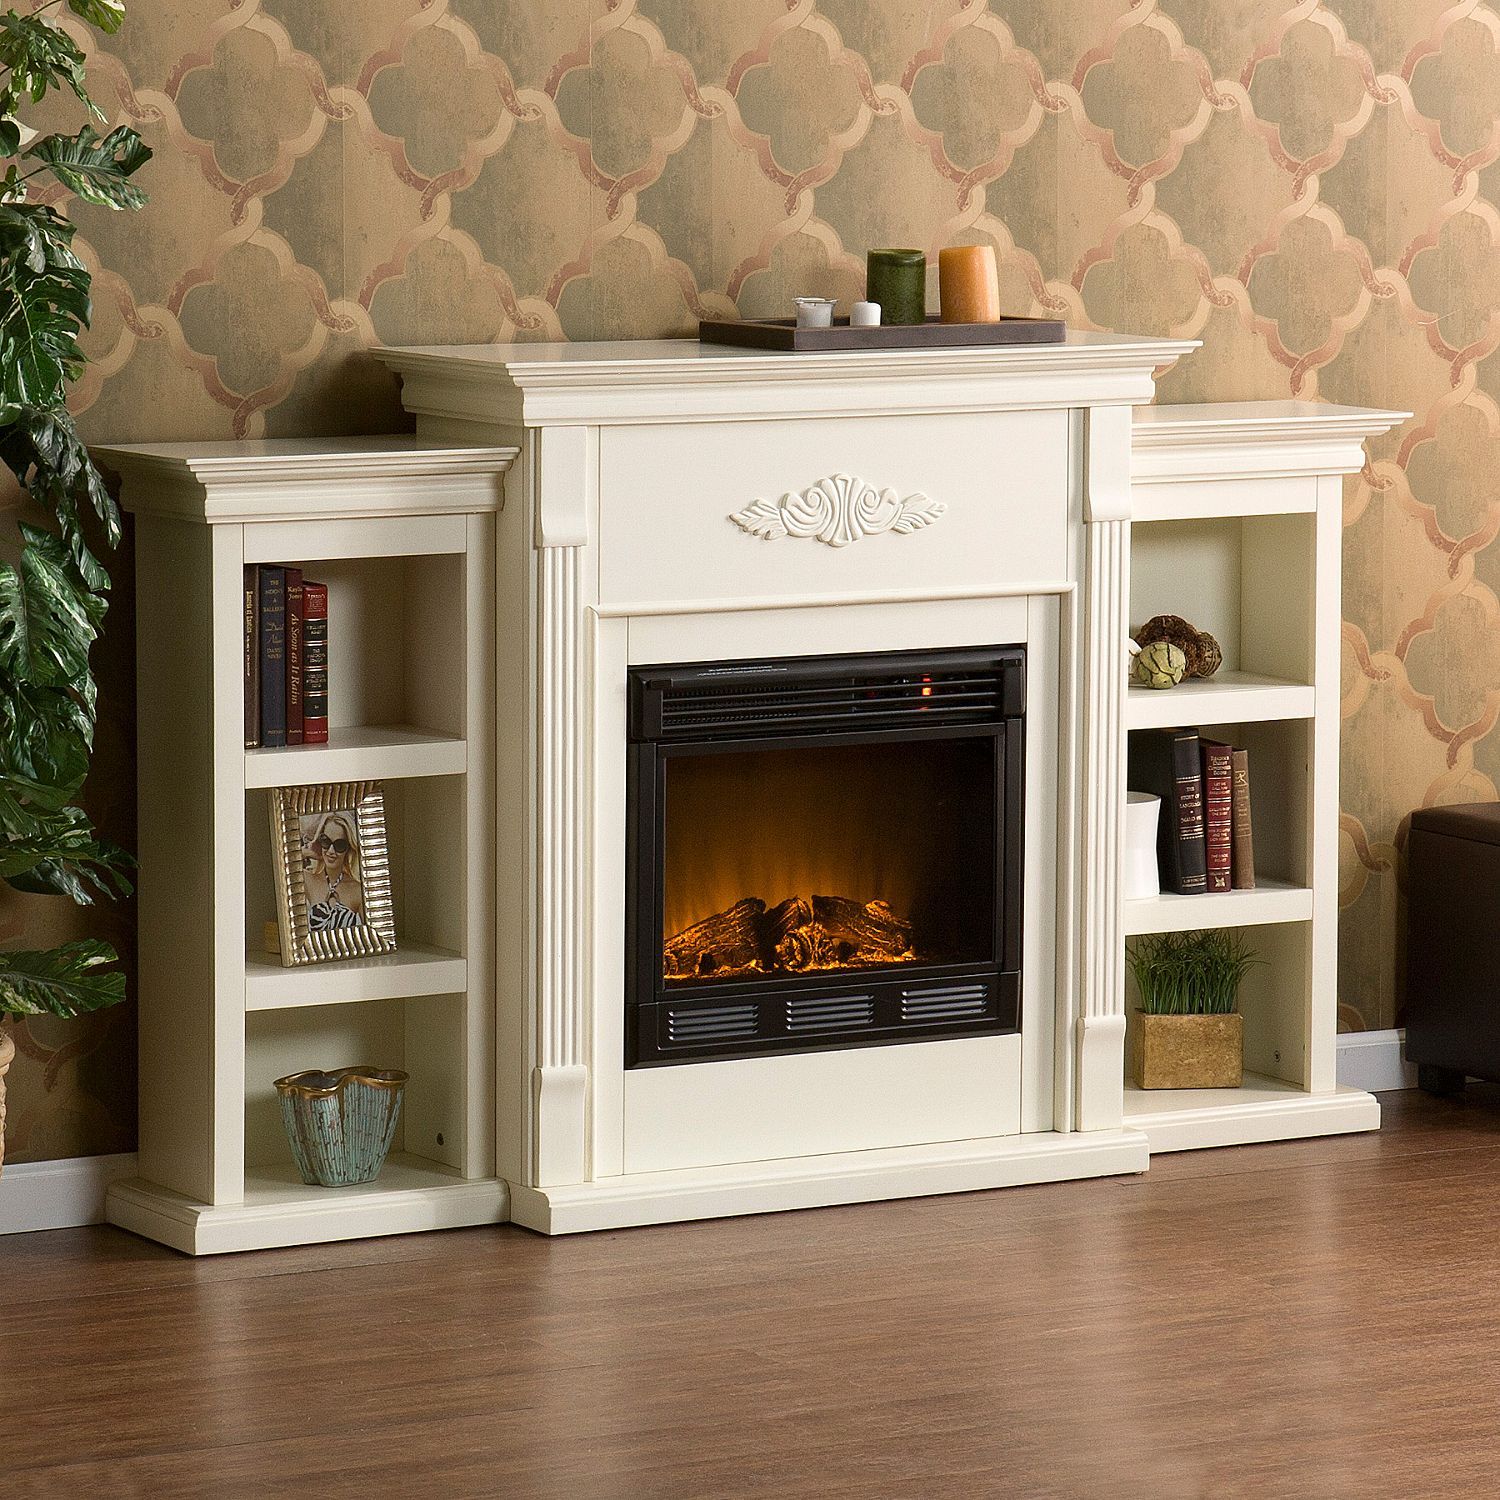 Beautiful Electric Fireplaces Unique Emerson Electric Fireplace Ivory Sam S Club